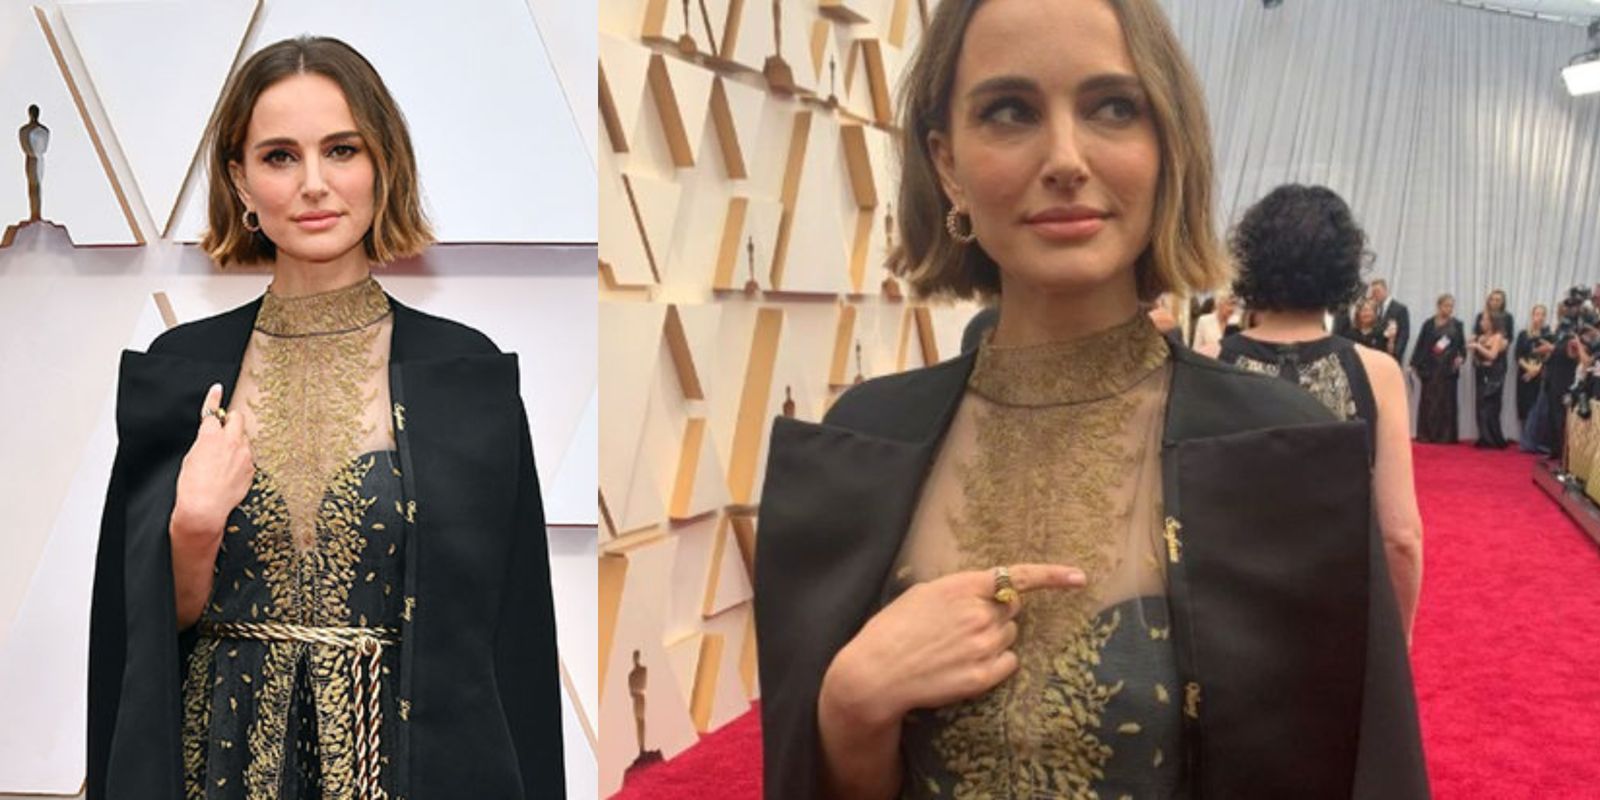 Oscars 2020: Natalie Portman Pays Tribute To Female Directors Who Were Snubbed, Embroiders Names On Her Cape ; Watch